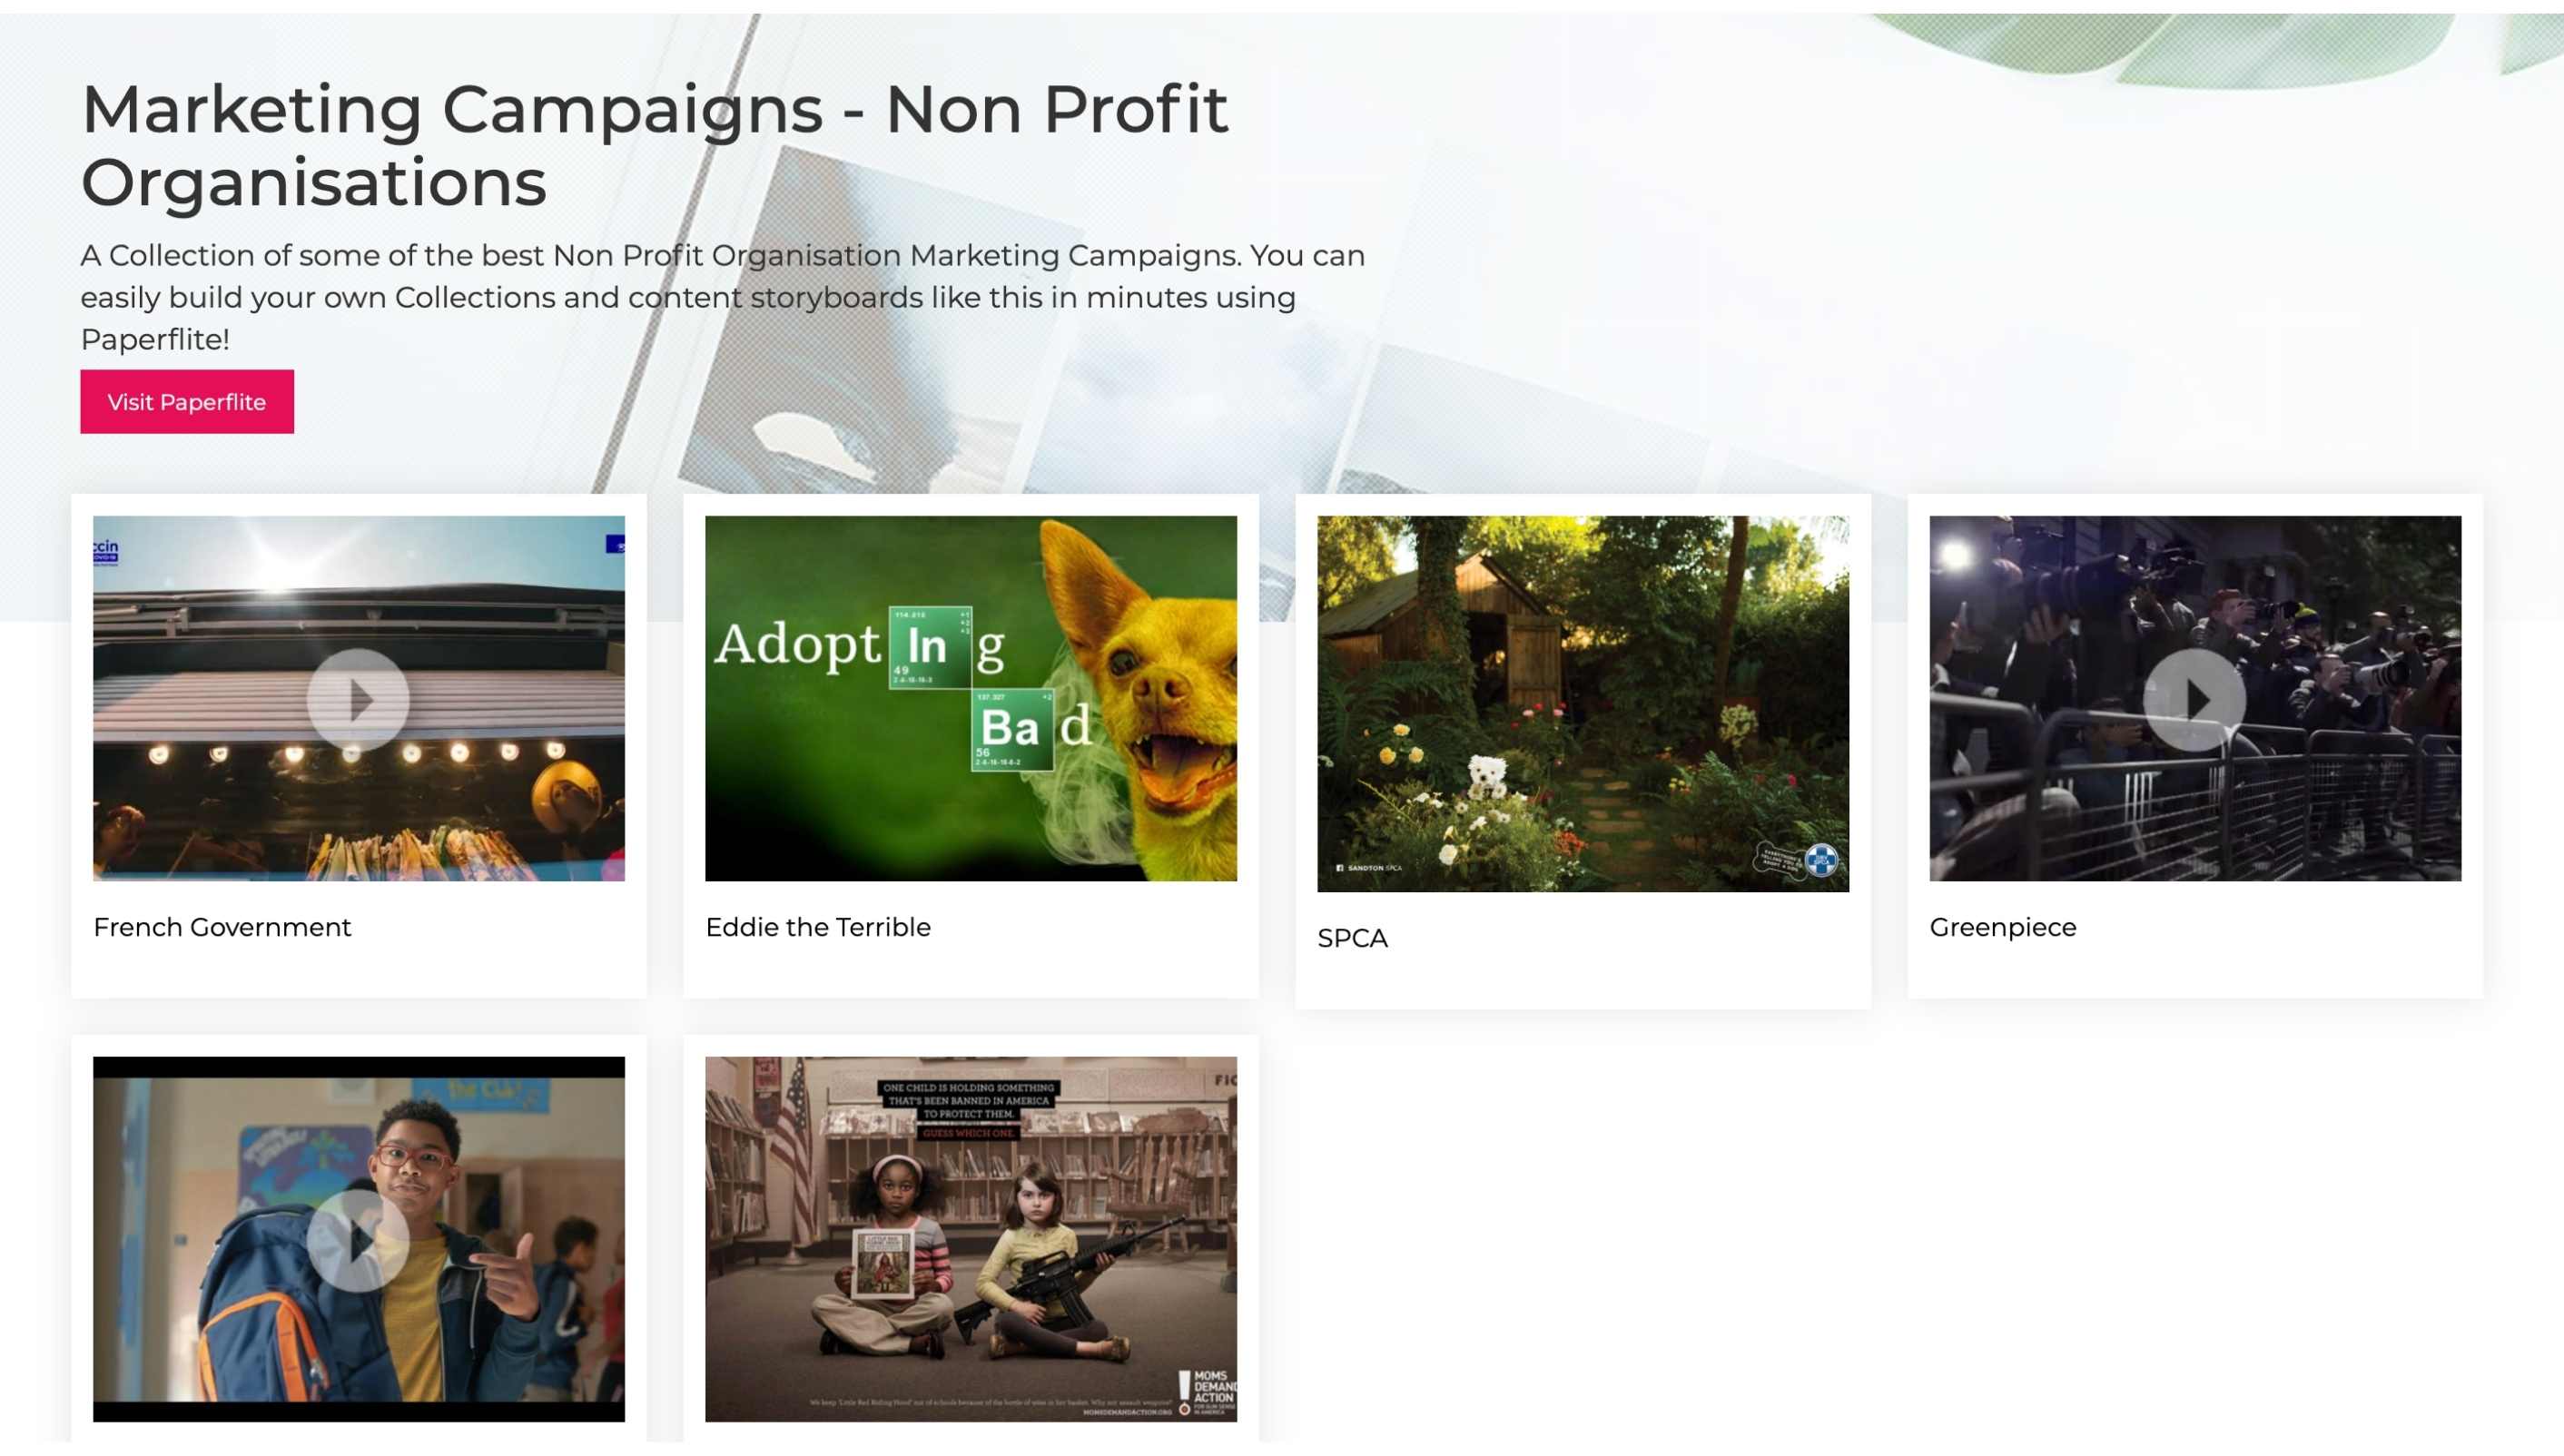 A Paperflite collection of Marketing Campaign examples in the Non Profit Organisation industry